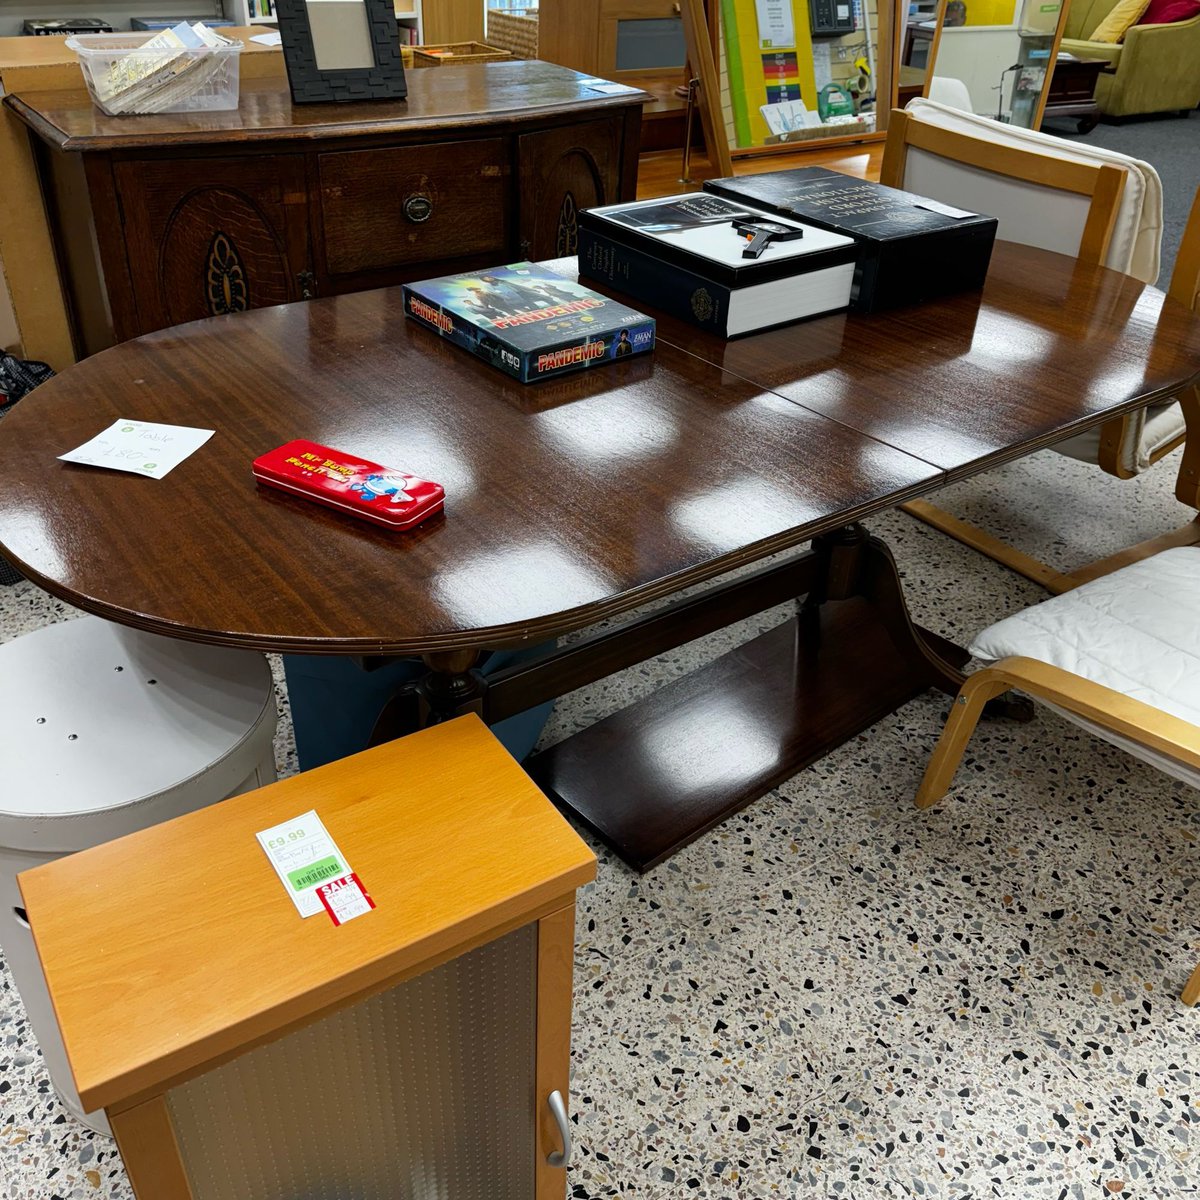 Table £80
We are in need of good condition donations to continue our work. We operate a local collection service for large furniture, call the shop 02380 779580. #secondhandfurniture #southampton #retrofurniture #charityshops #foundinoxfam #shirley #oxfamshops #furniture